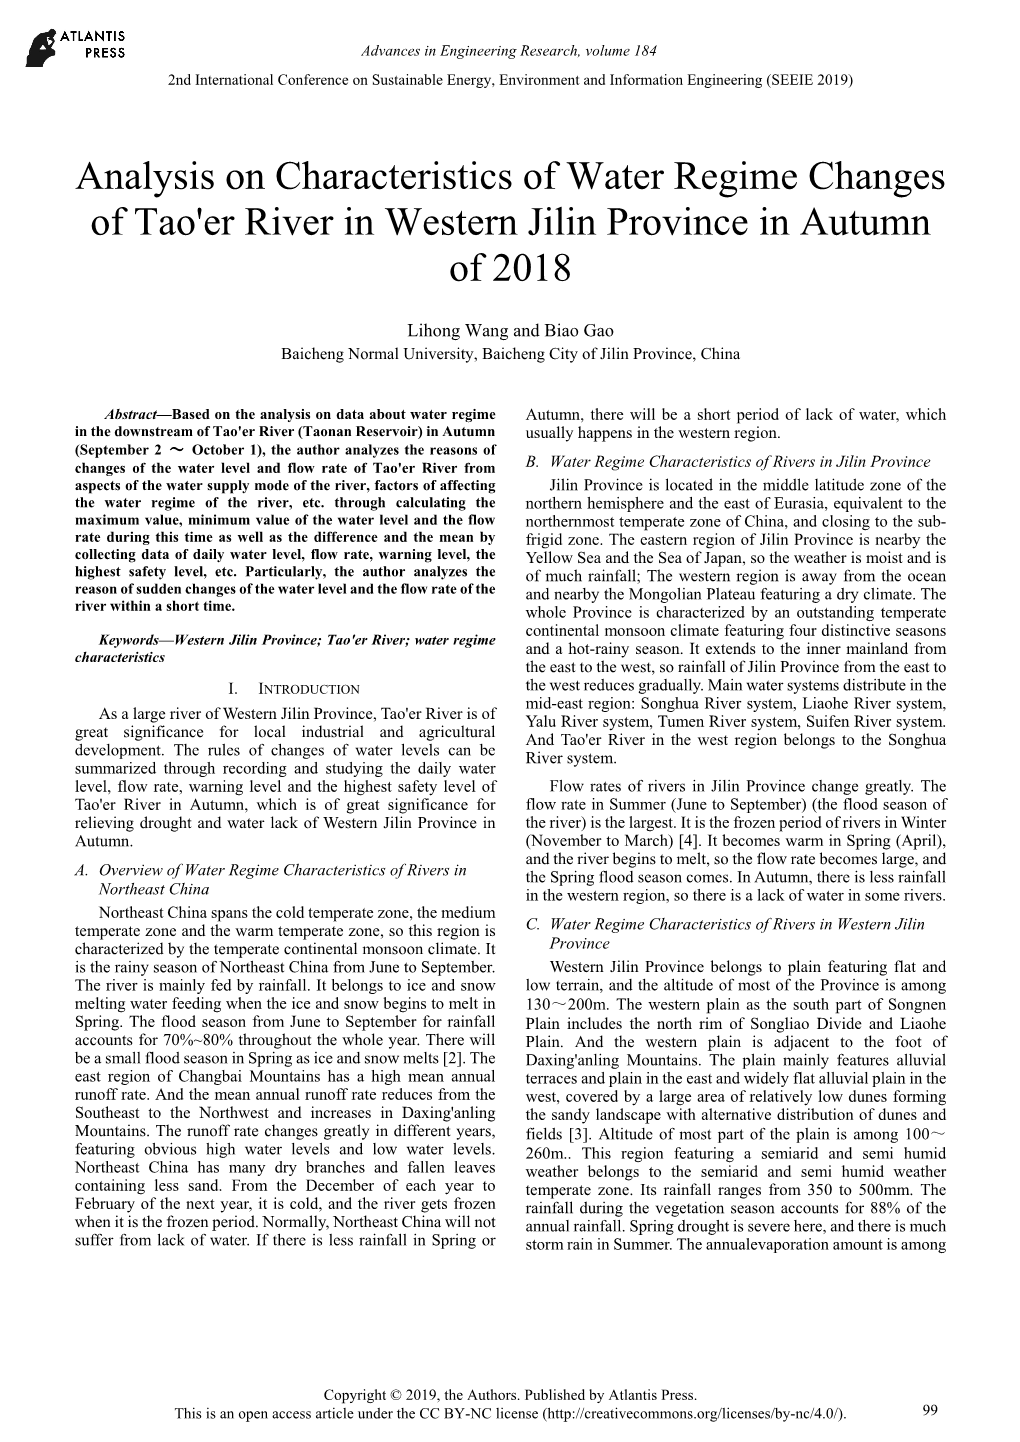 Analysis on Characteristics of Water Regime Changes of Tao'er River in Western Jilin Province in Autumn of 2018